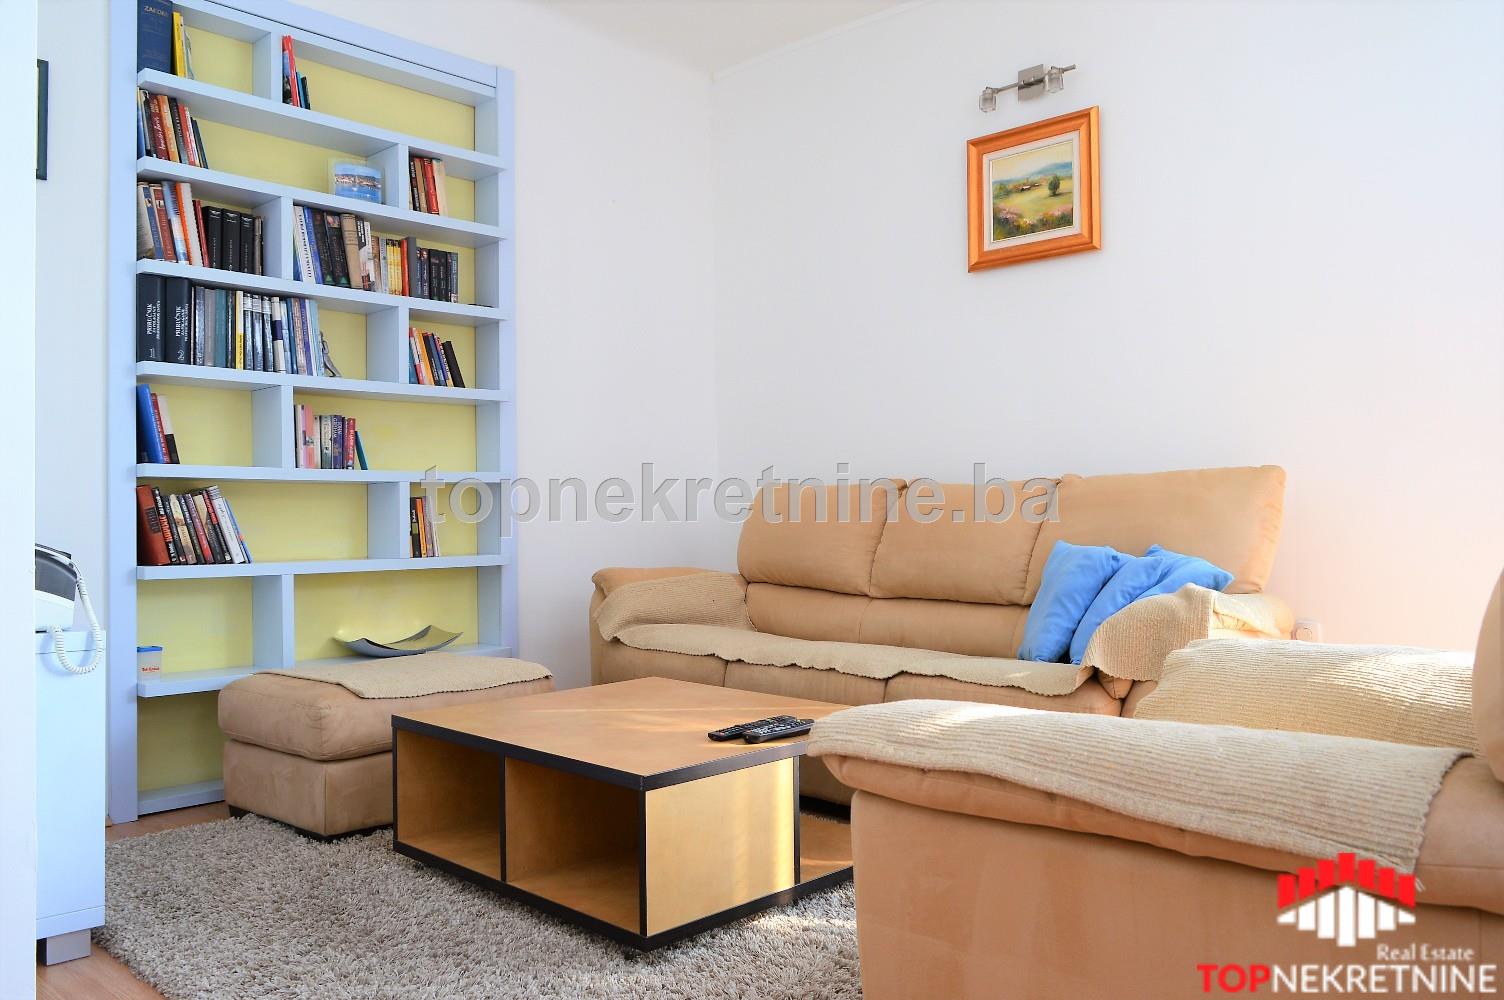 Bright, renovated, spacious, furnished 1BDR apartment in the city center near BBI